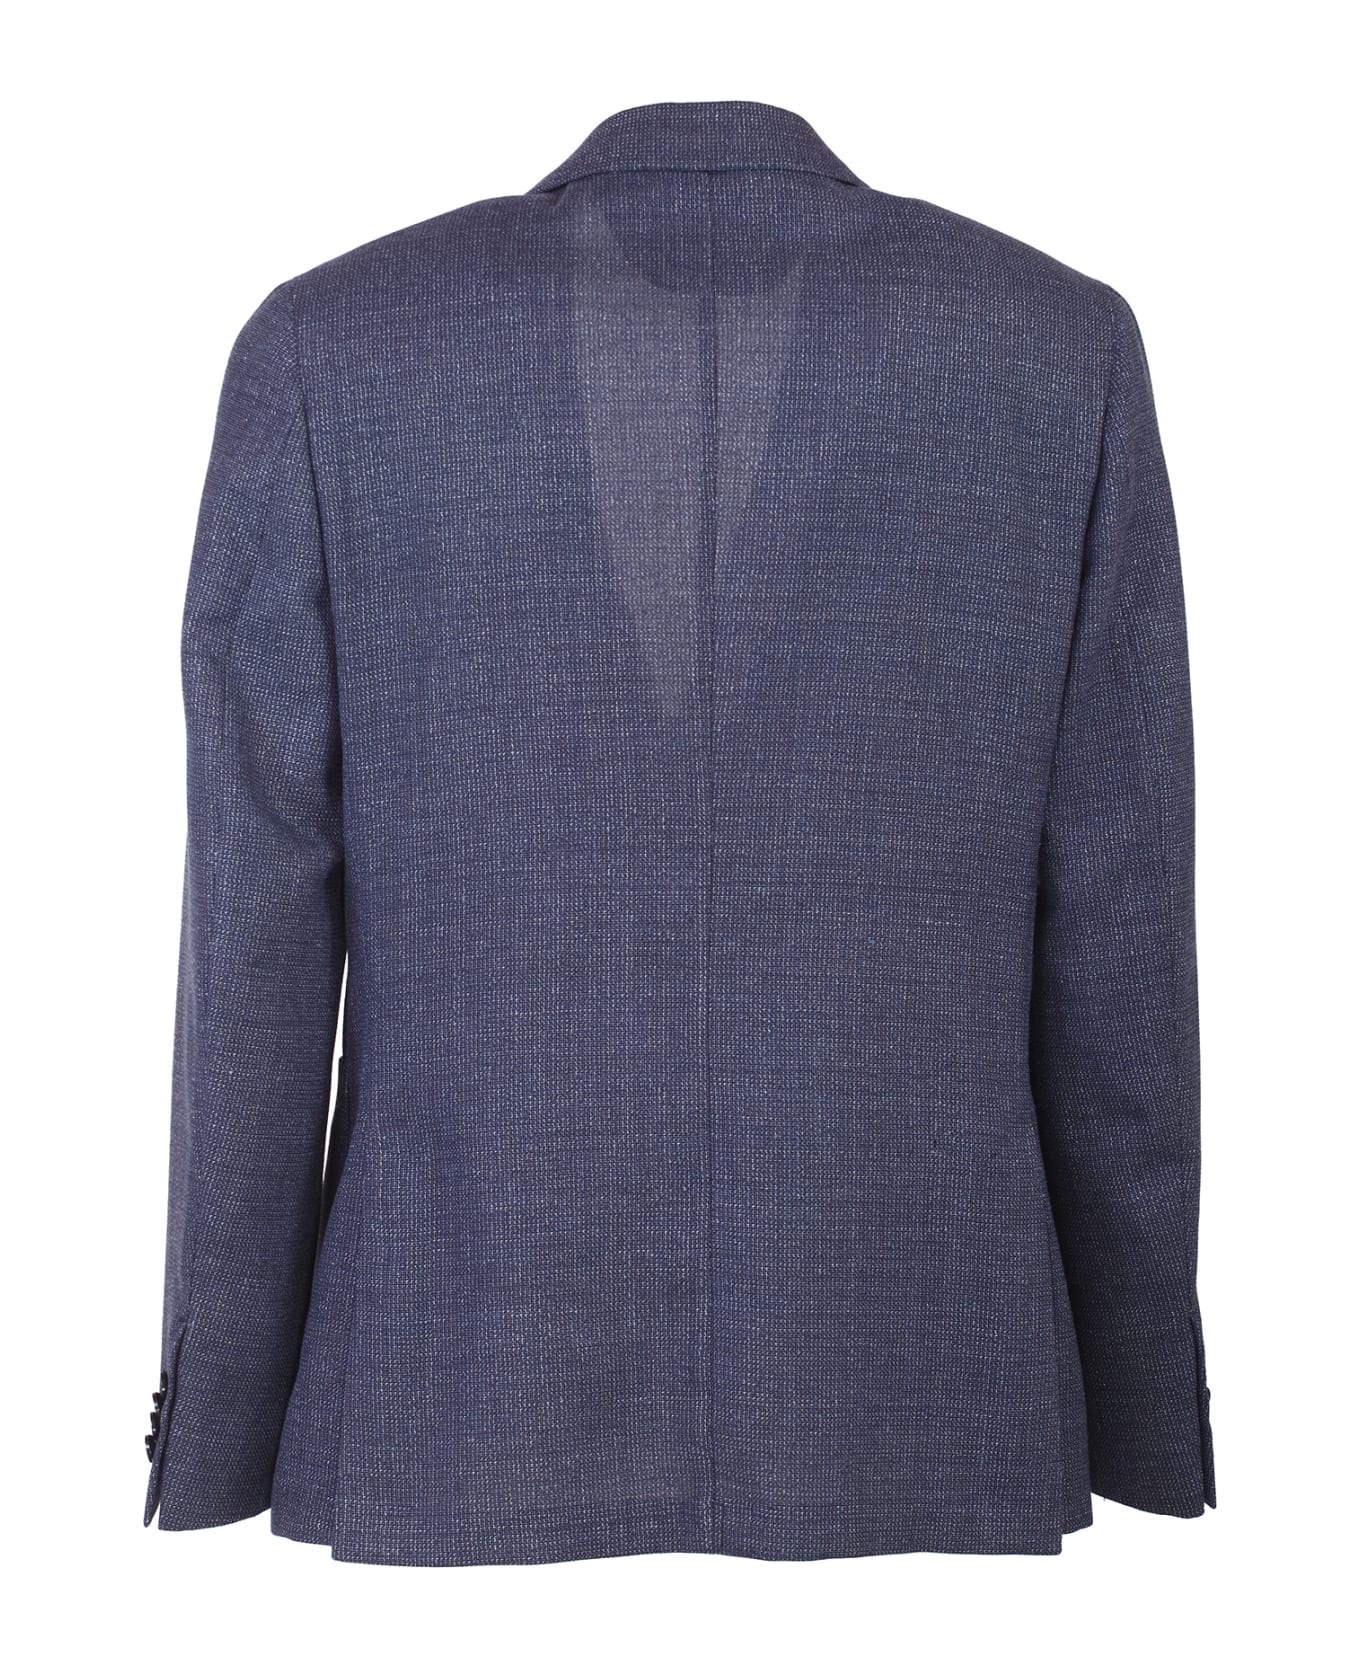 Zegna Jackets Clear Blue - Clear Blue